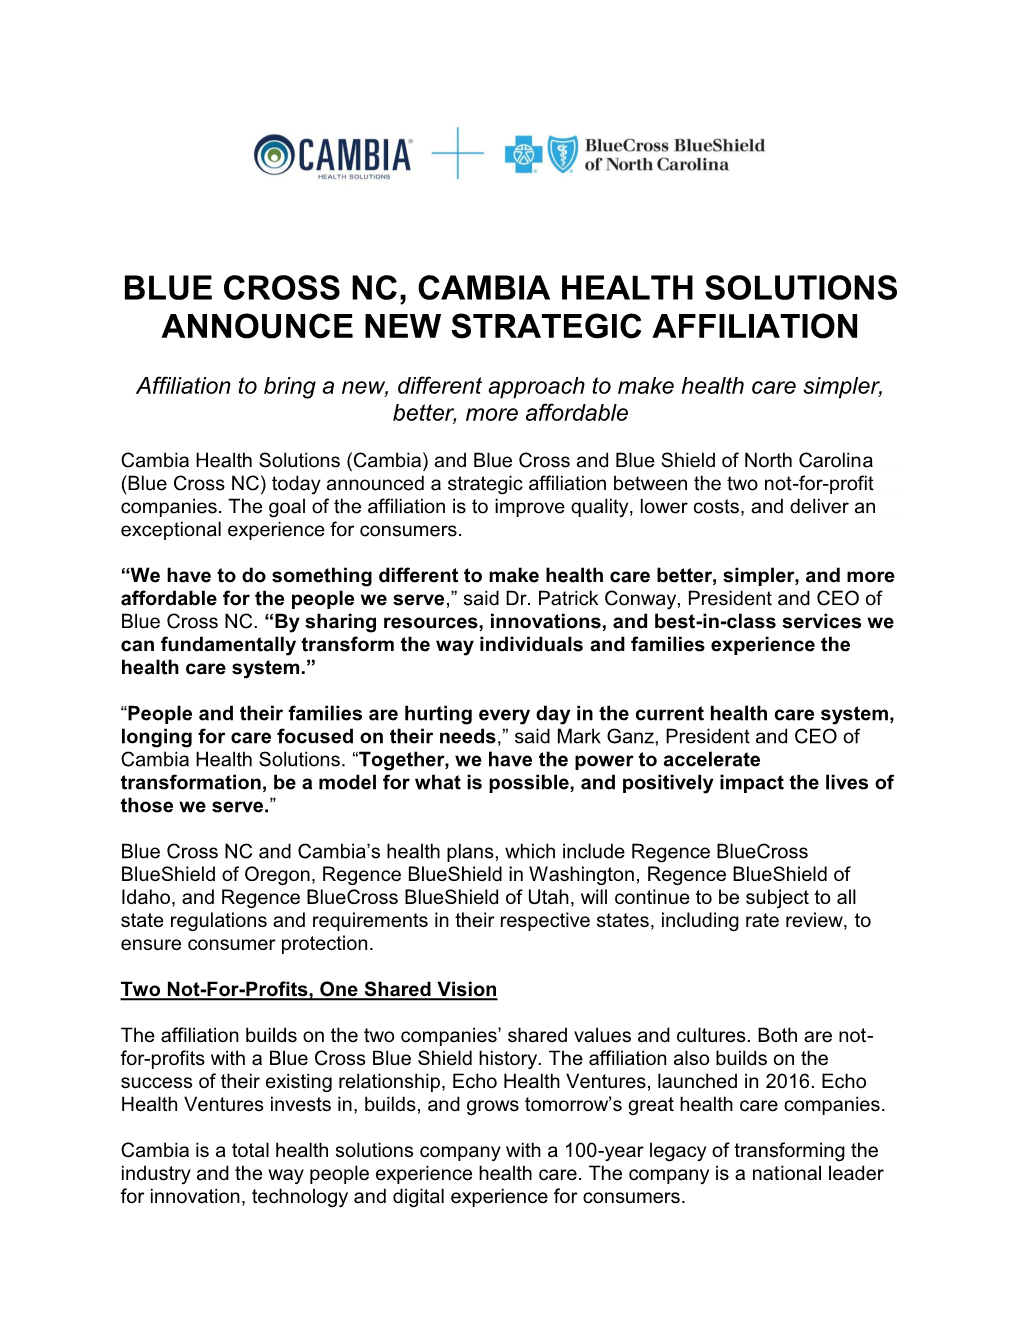 Blue Cross Nc, Cambia Health Solutions Announce New Strategic Affiliation